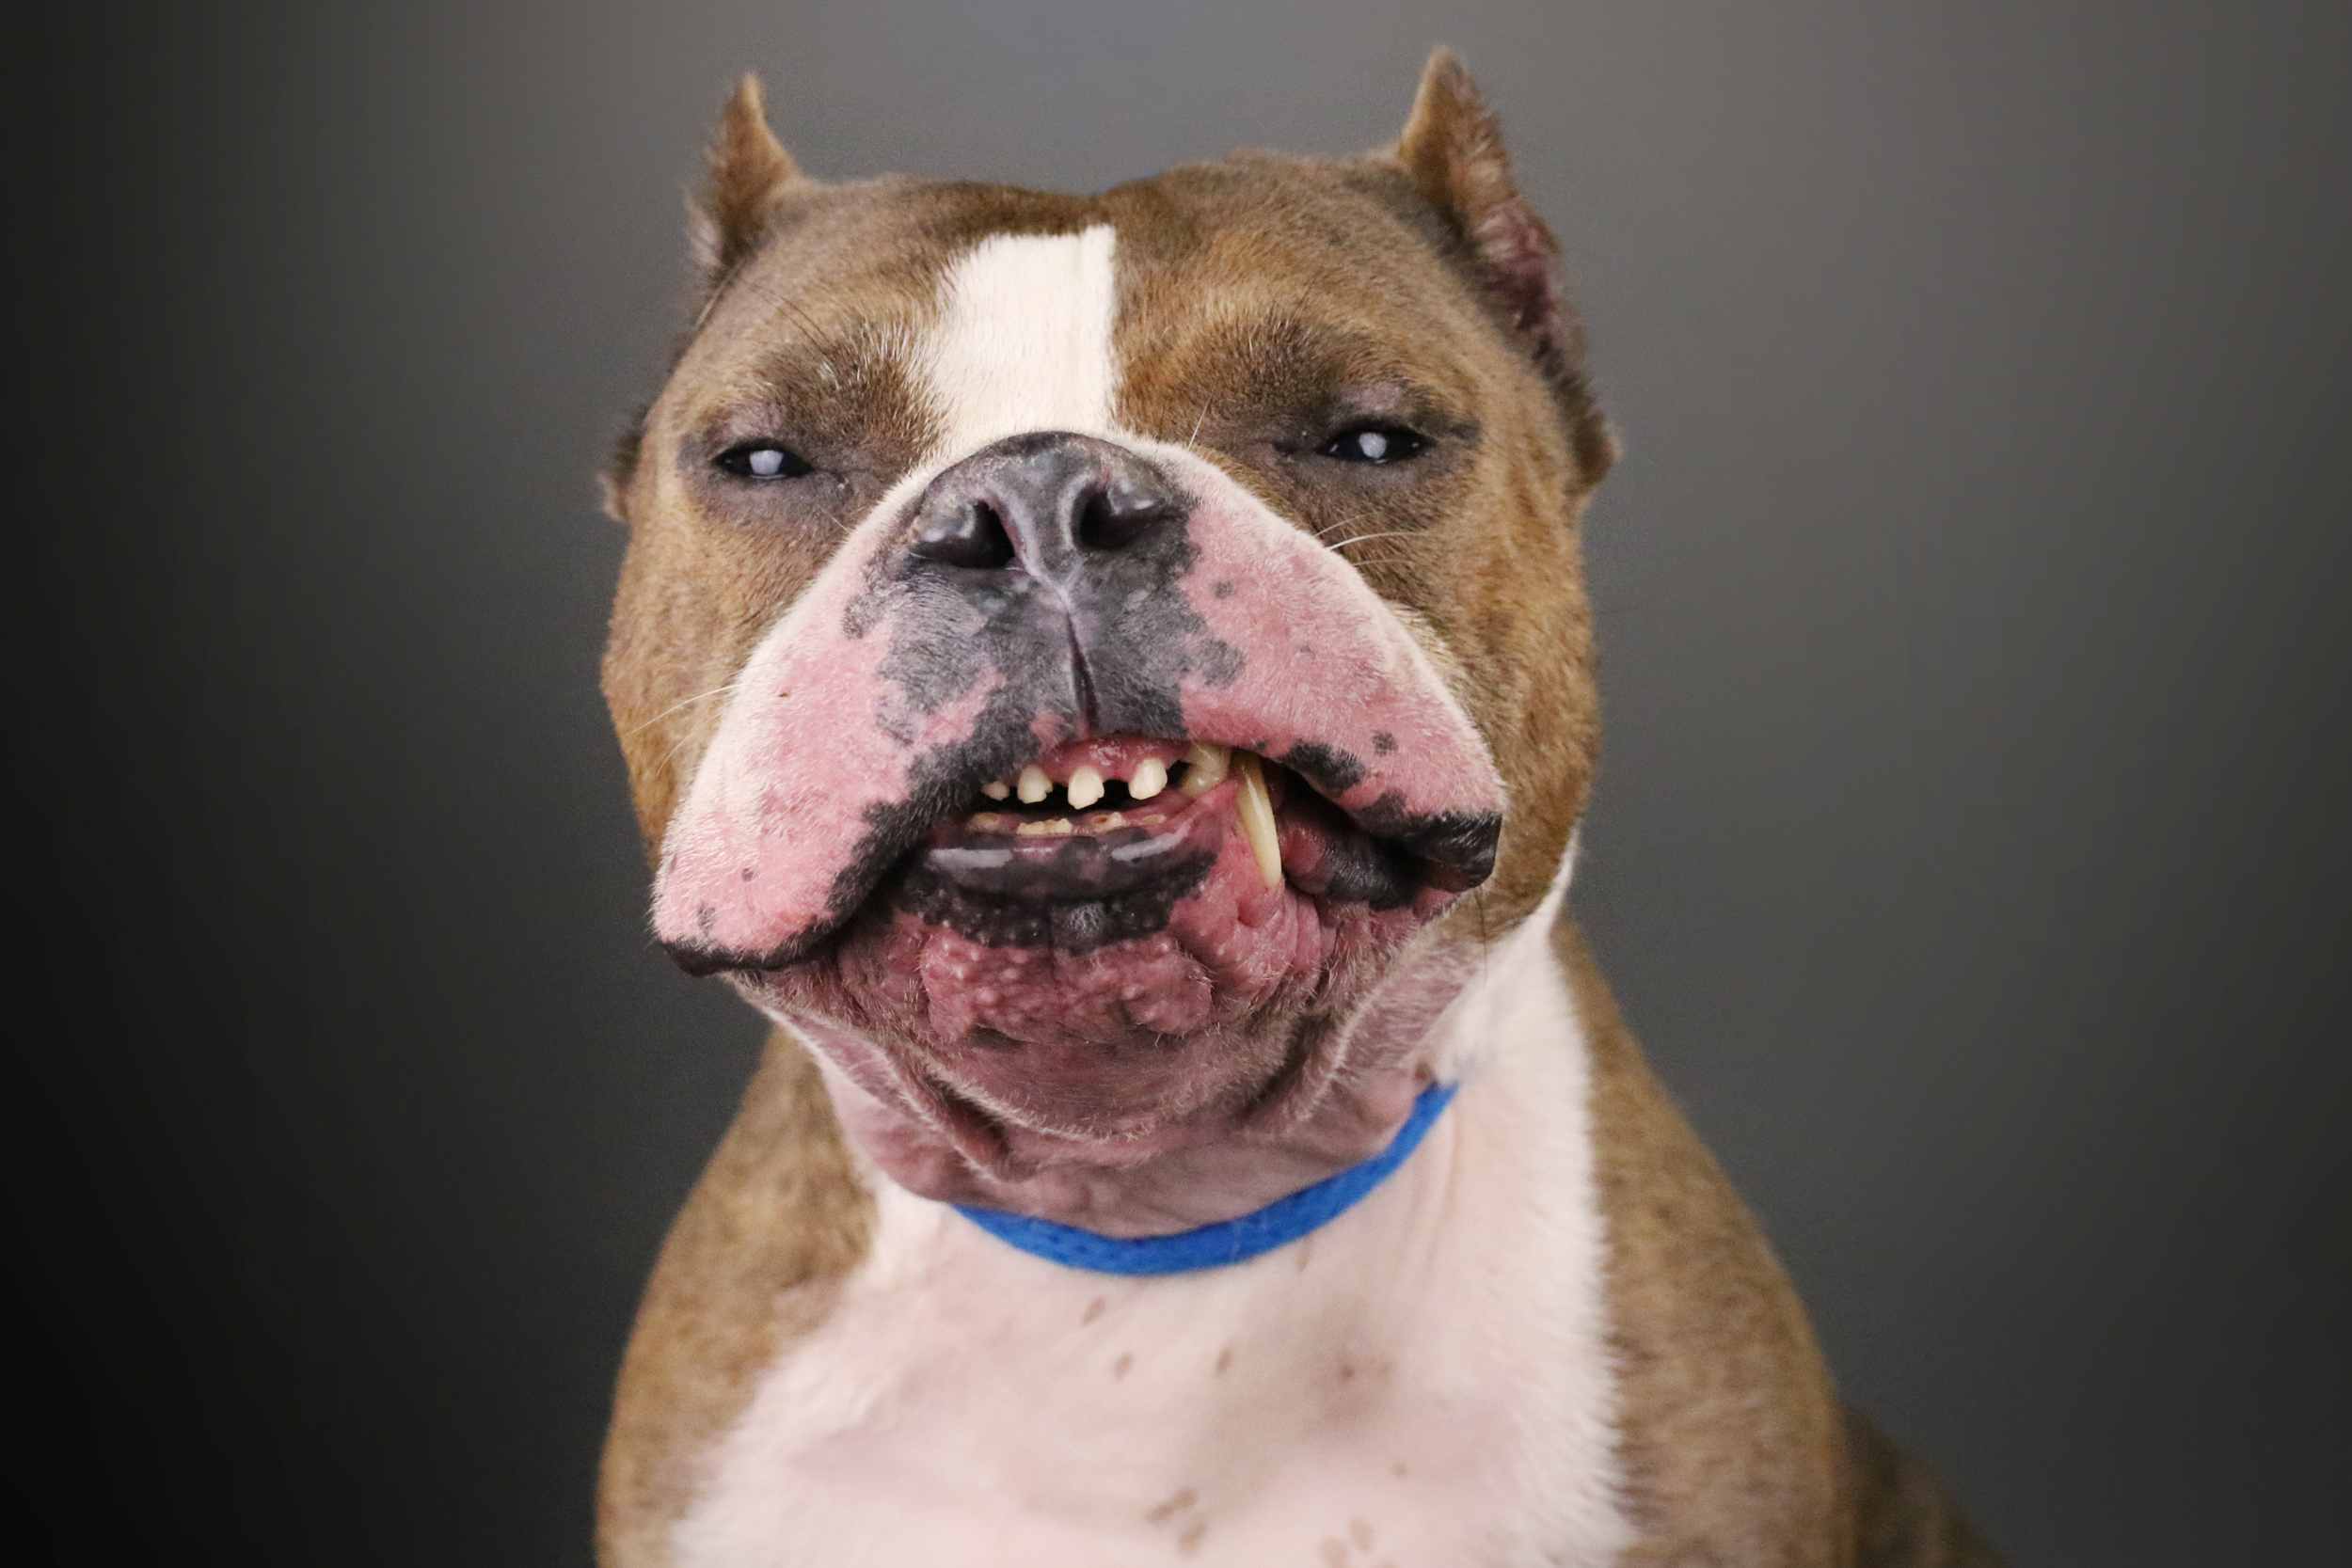 PHOTO: Brutus, a  pit bull mix, who has seen been adopted, poses during a photo shoot.